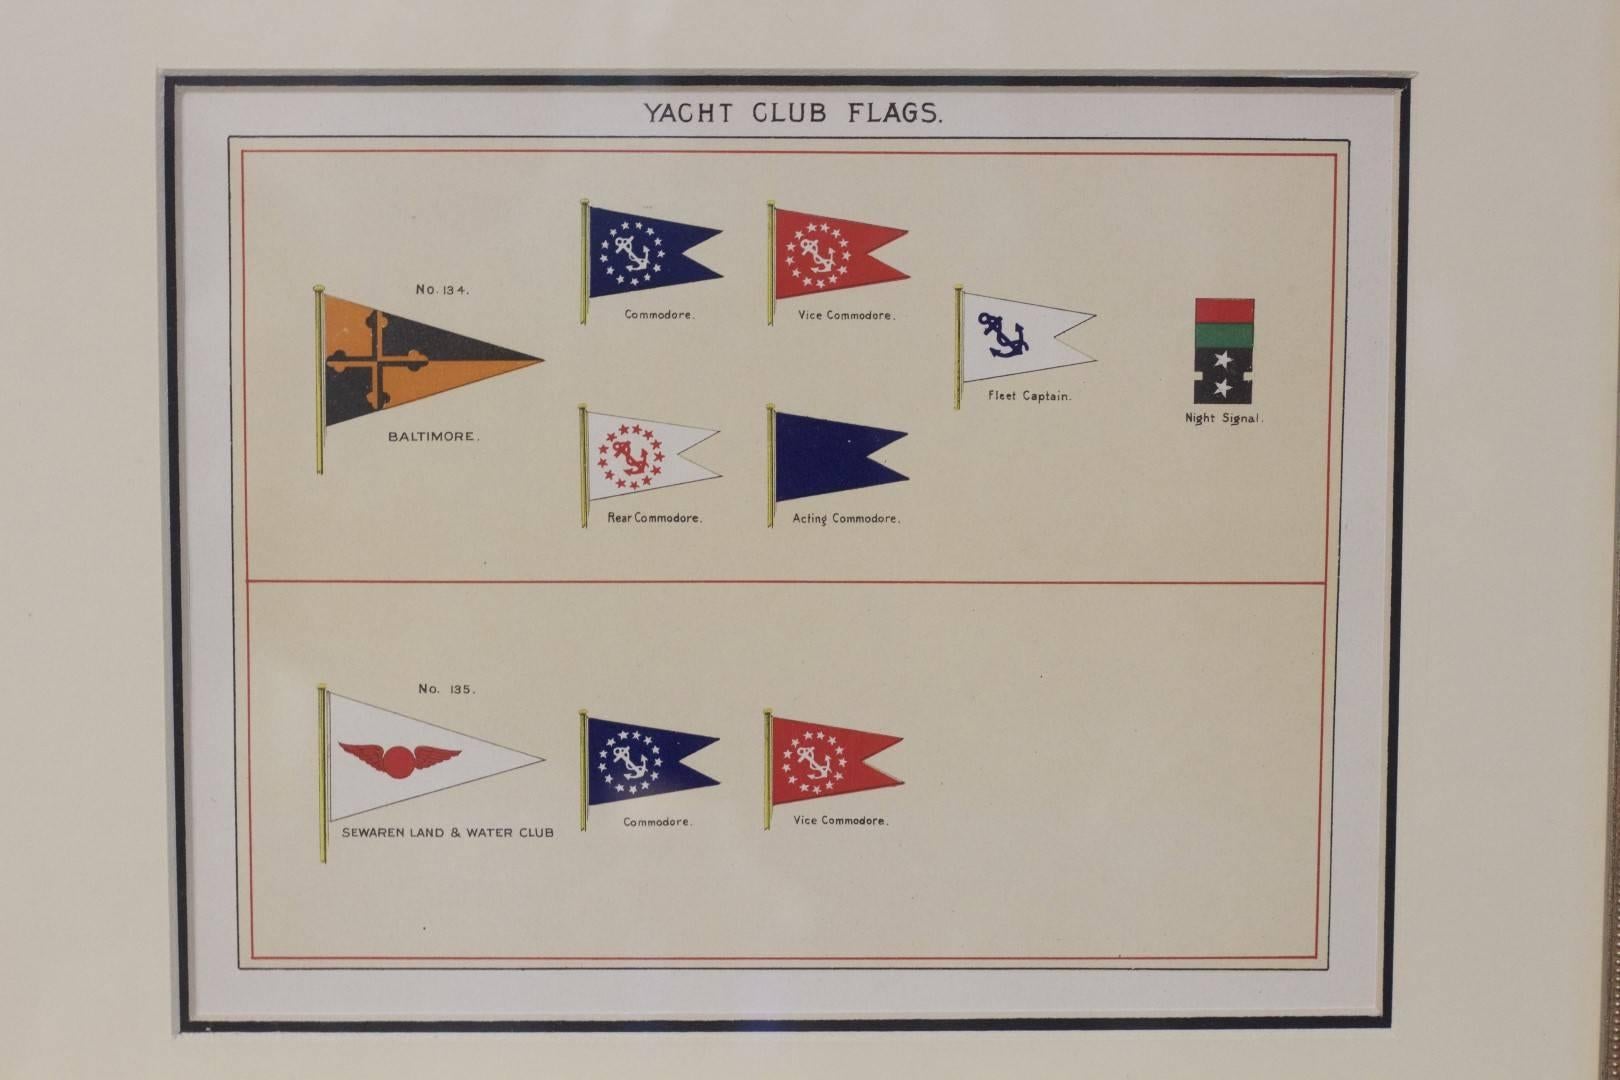 A framed original page from Lloyd's Register, circa 1938. Showing yacht club flags of Baltimore, Sewearan Land and Water Club. Respective commodore, vice commodore and fleet captain flags. Matted and framed. Dimensions: 12.5